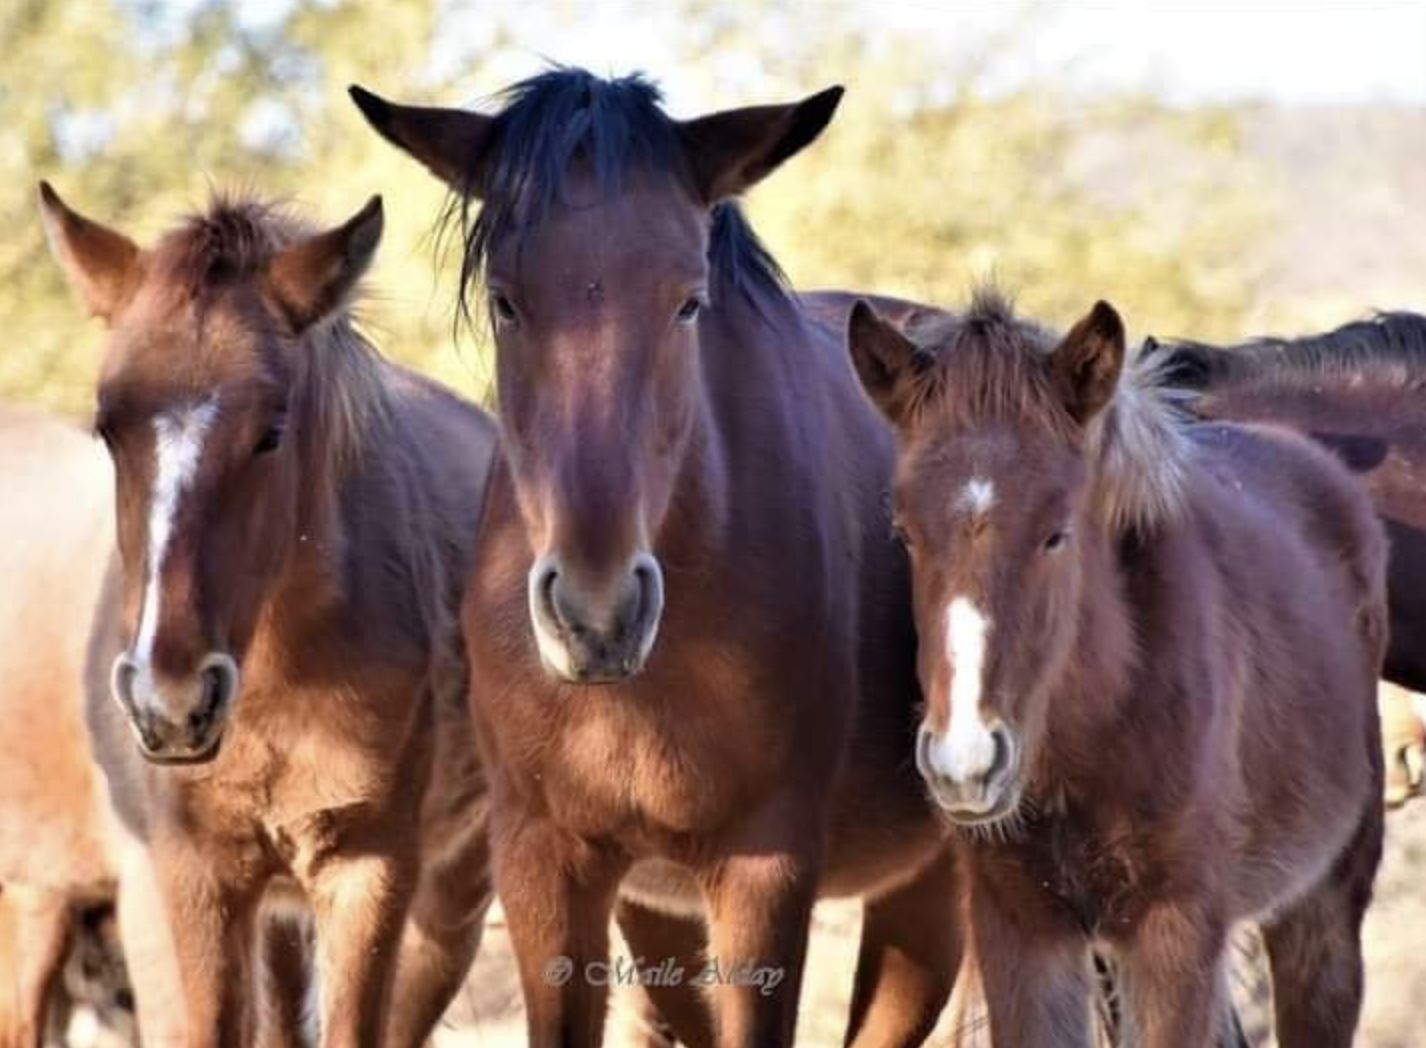 A Story of Humane Wild Horse Management